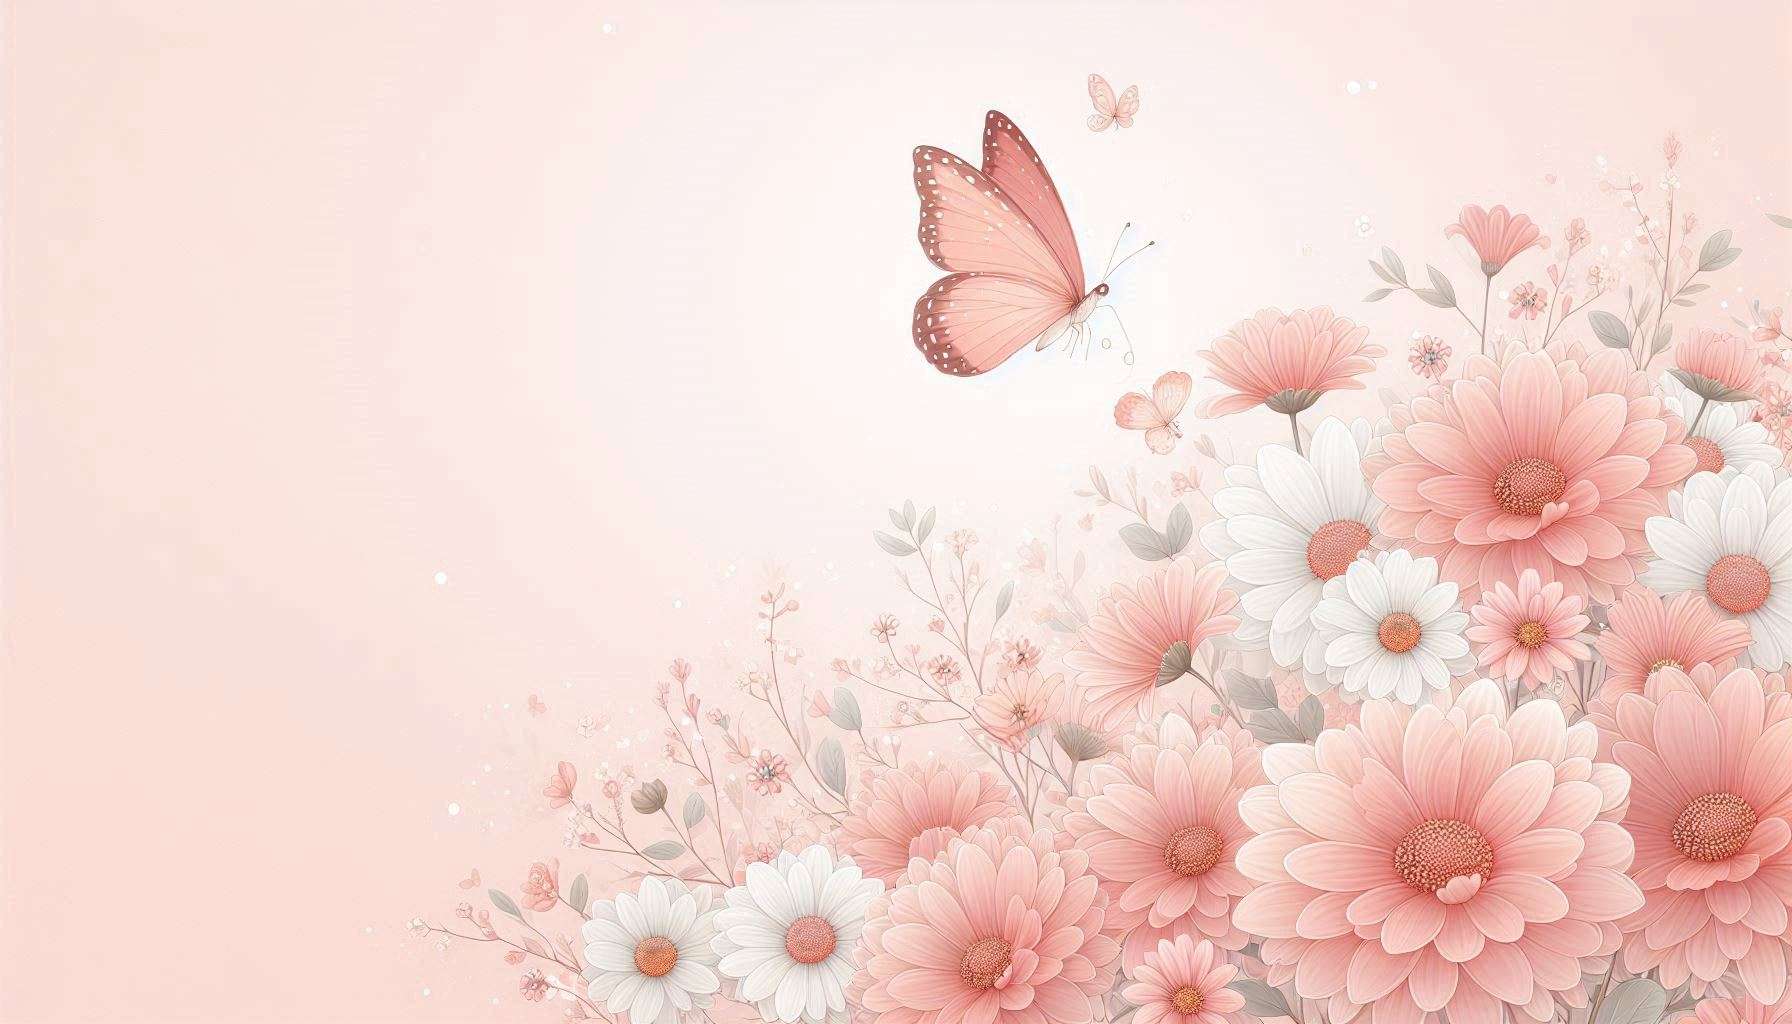 Download Free download light pink background with flower for websites, slideshows, and designs | royalty-free and unlimited use.